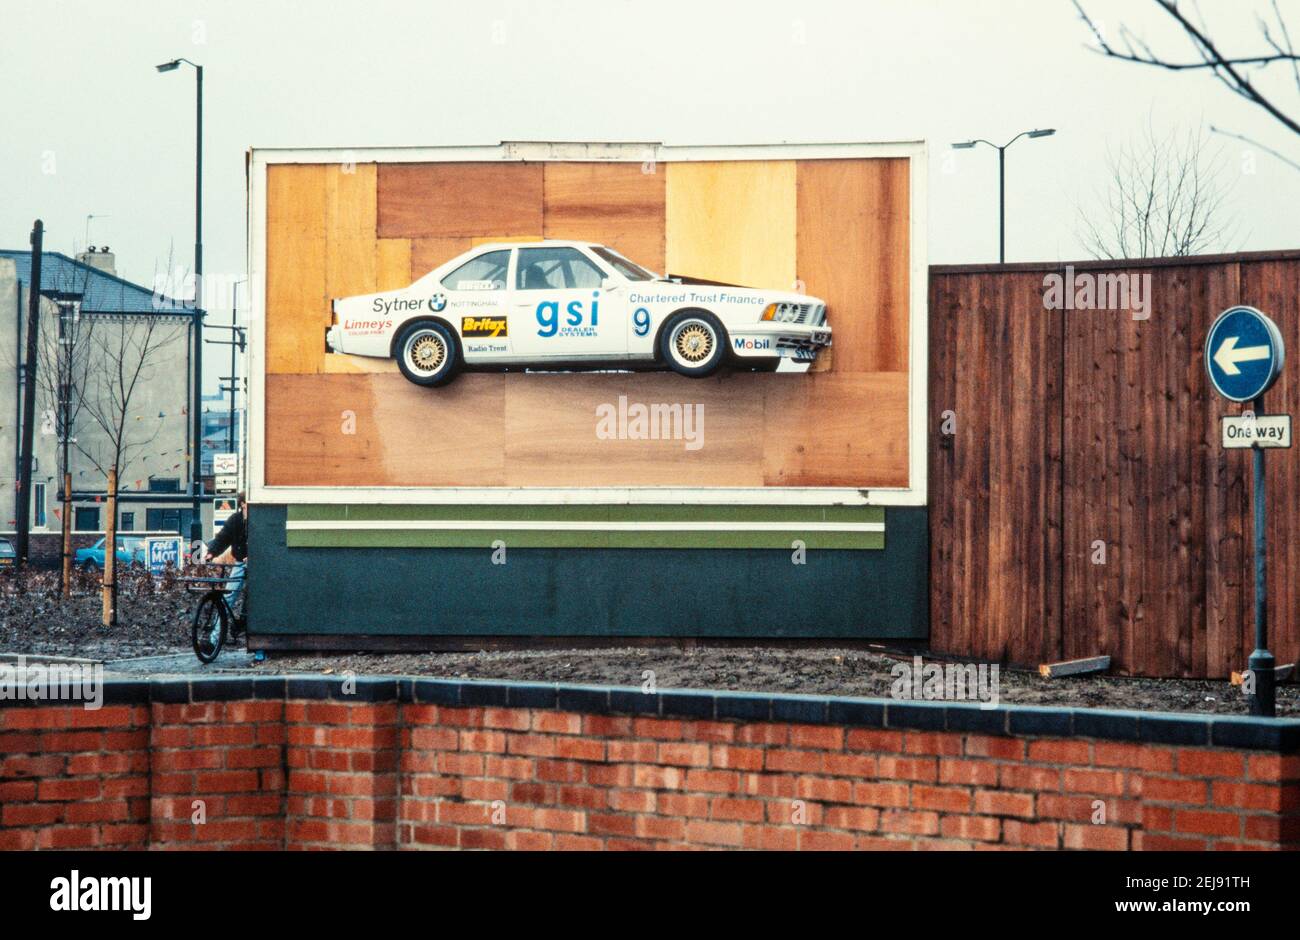 A Sytner advertising hoarding at Trent bridge Nottingham in the 1980s. The car is a BMW E24 6 series. A  BMW 635 CSi Group A that used to race in the British Touring Cars race series in the UK during the 1980s Stock Photo